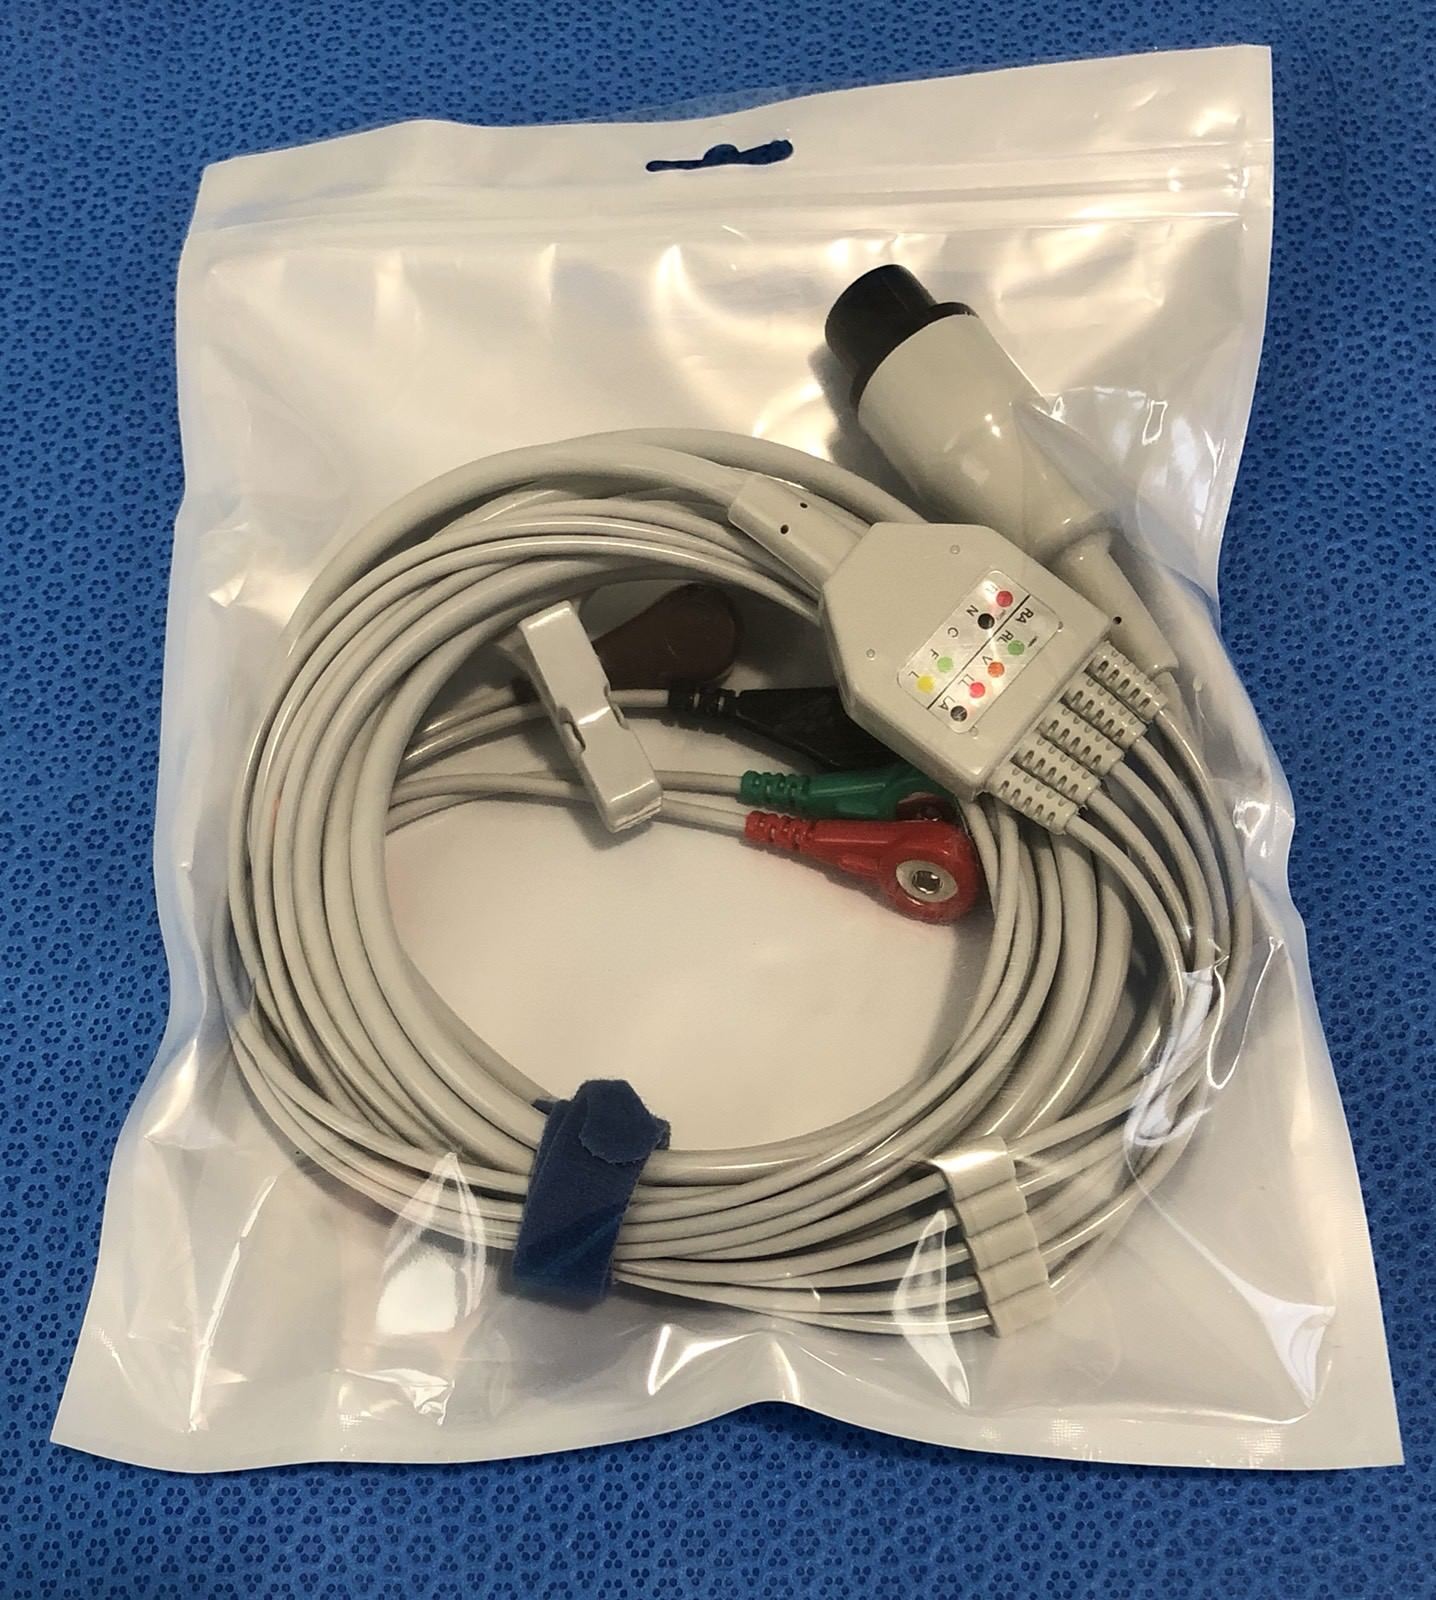 ECG EKG Cable 6 Pin 5 Leads Snap AHA - Same Day Shipping - US Located DIAGNOSTIC ULTRASOUND MACHINES FOR SALE